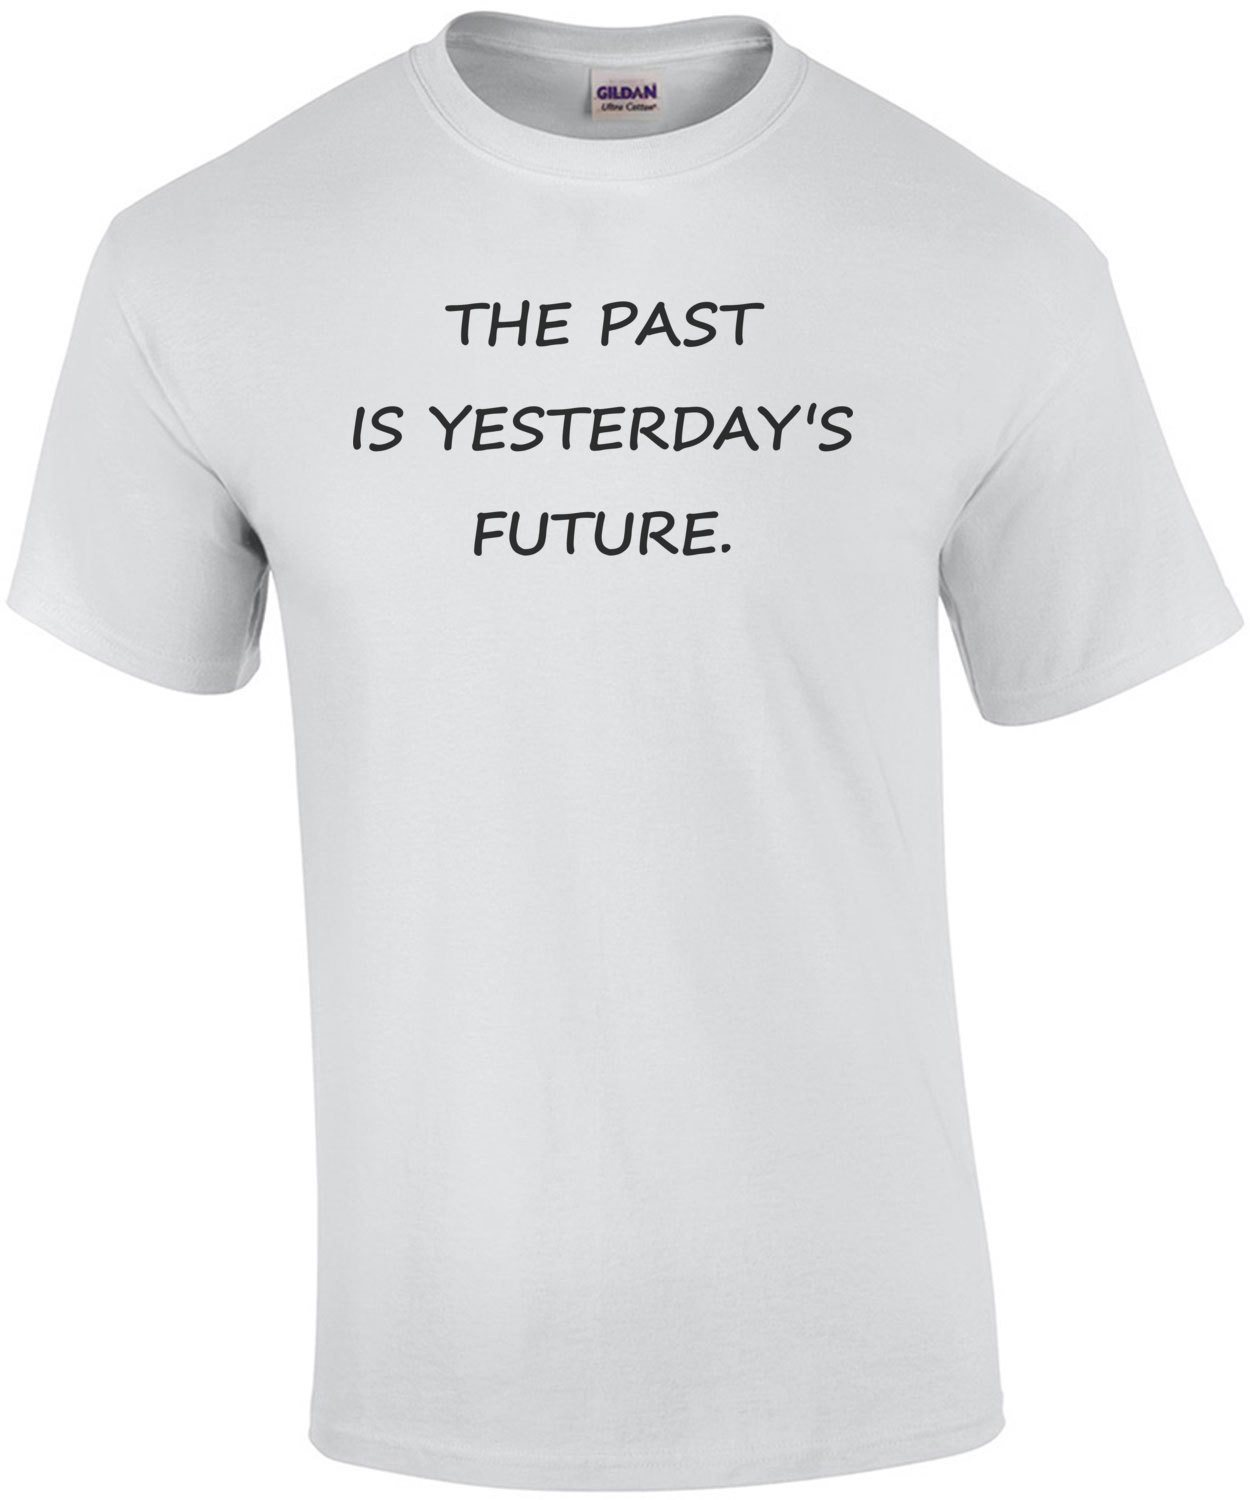 The Past Is Yesterday's Future - T-Shirt that makes no sense.